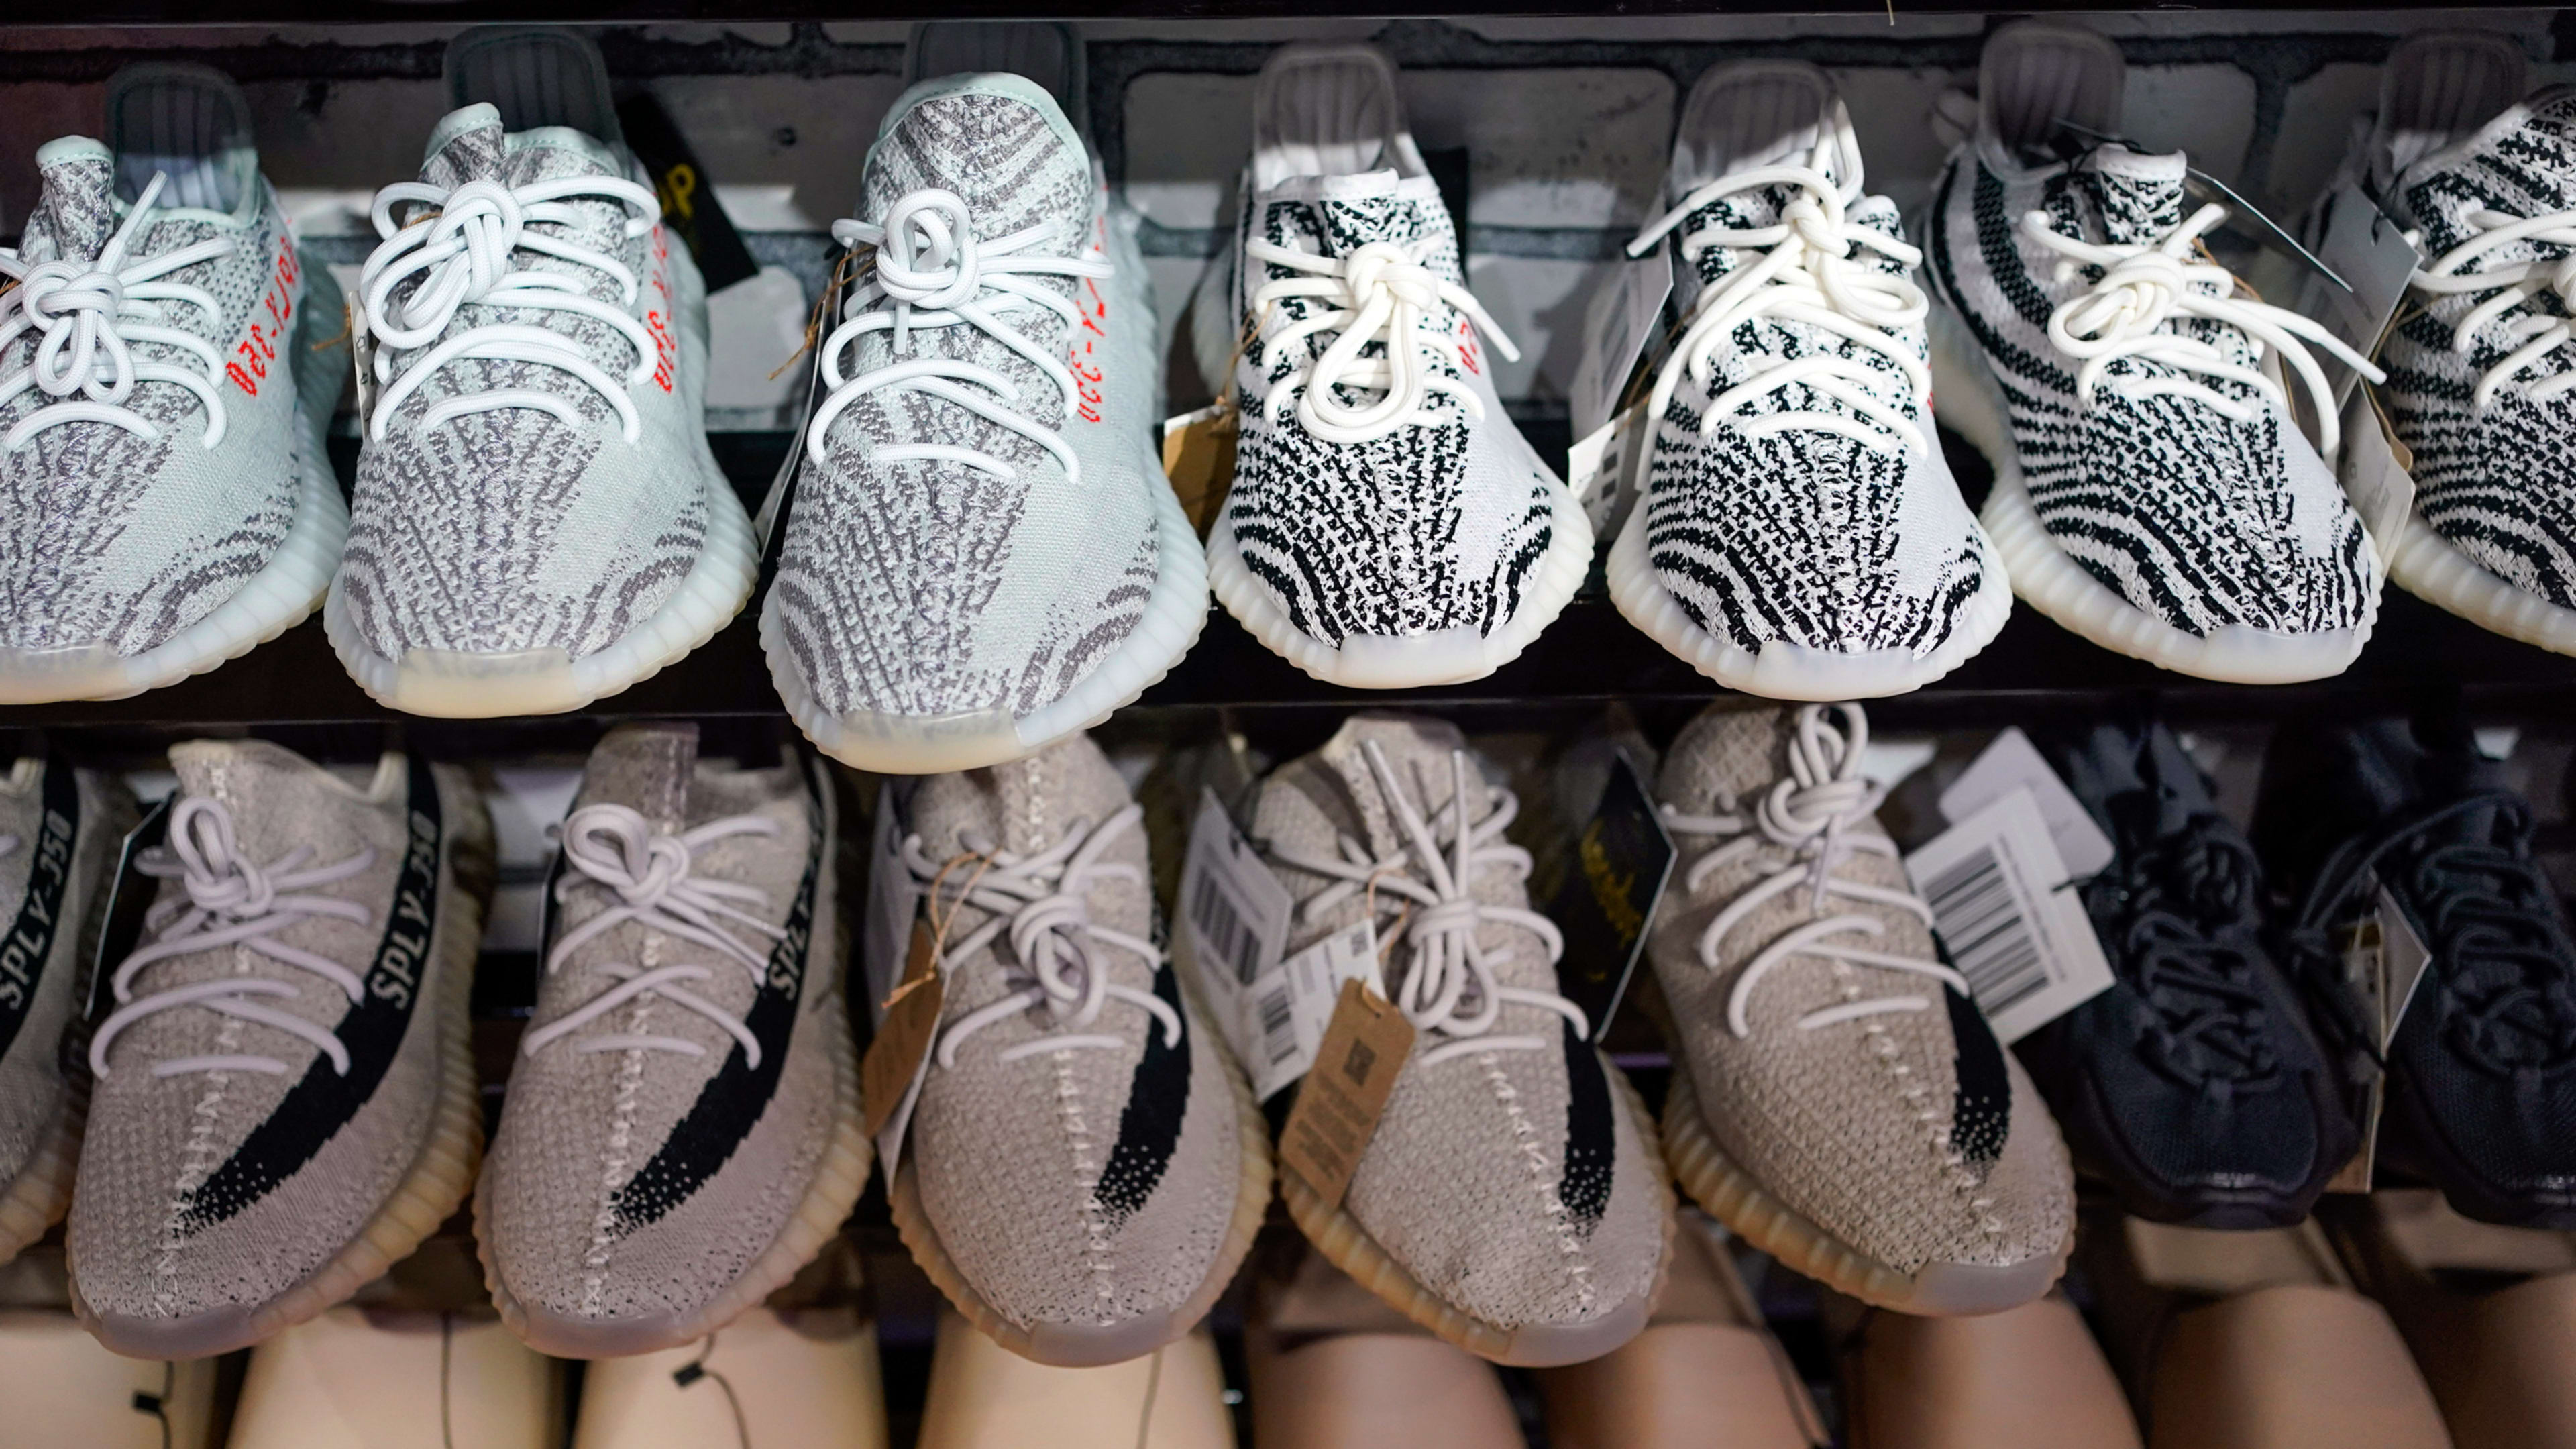 Yeezy shoes are back on sale at Adidas—with proceeds going to anti-hate groups